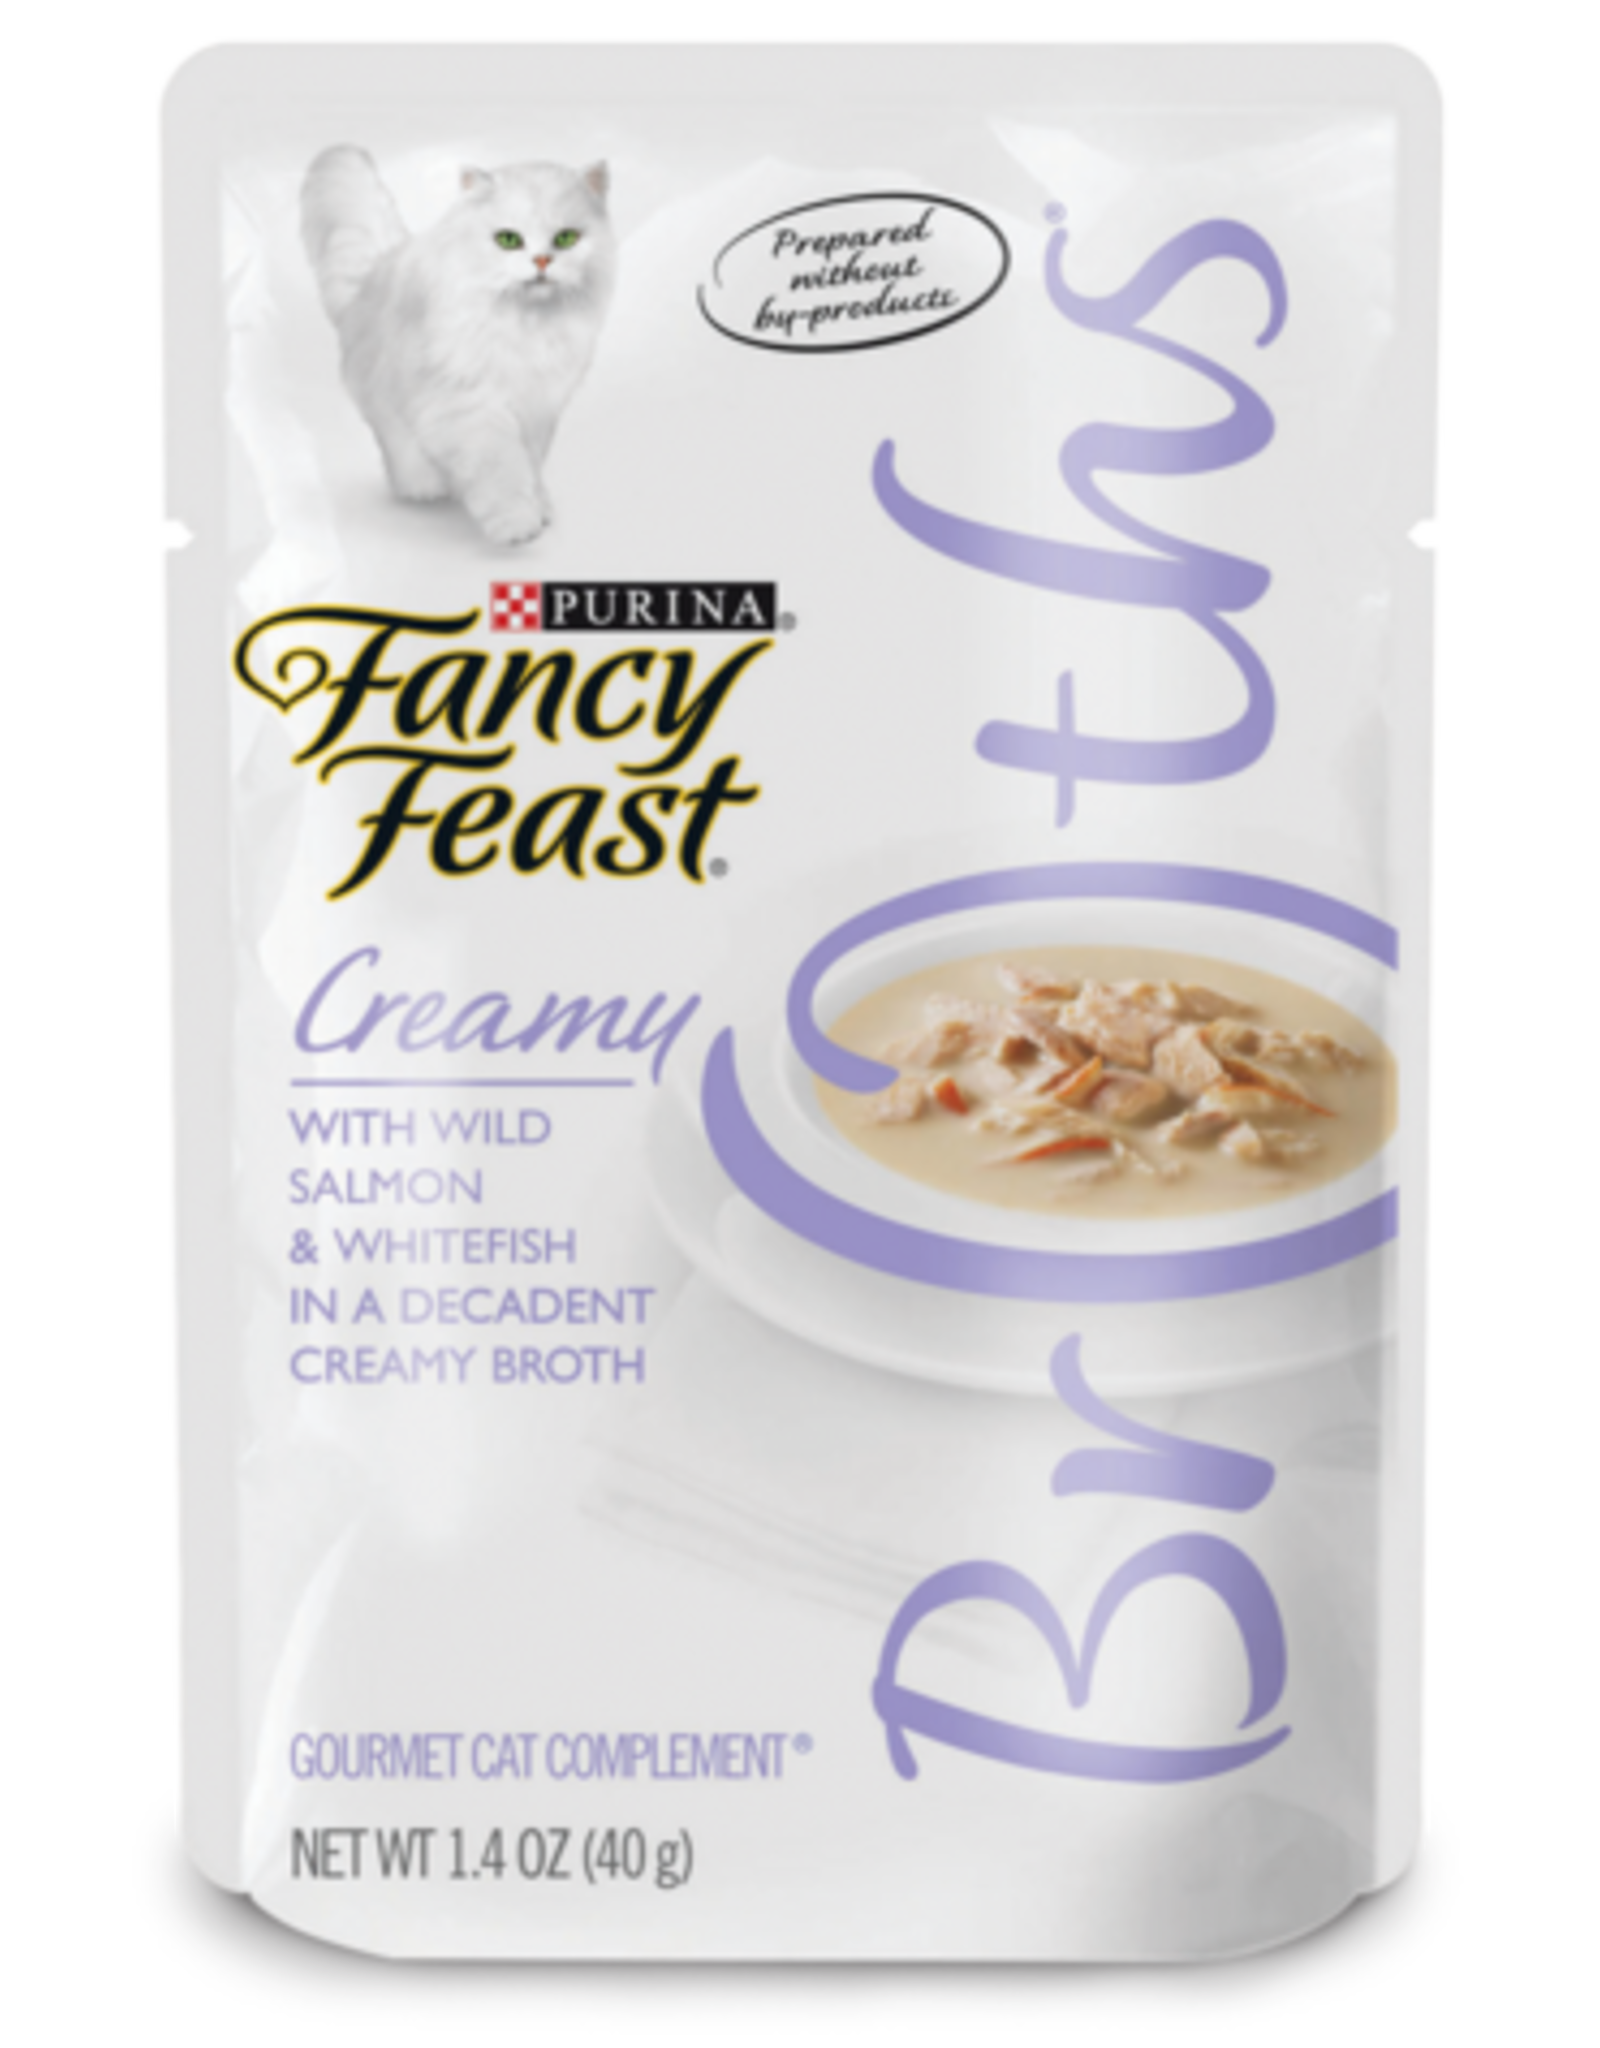 NESTLE PURINA PETCARE FANCY FEAST CREAMY BROTHS SALMON & WHITEFISH 1.4OZ CASE OF 16